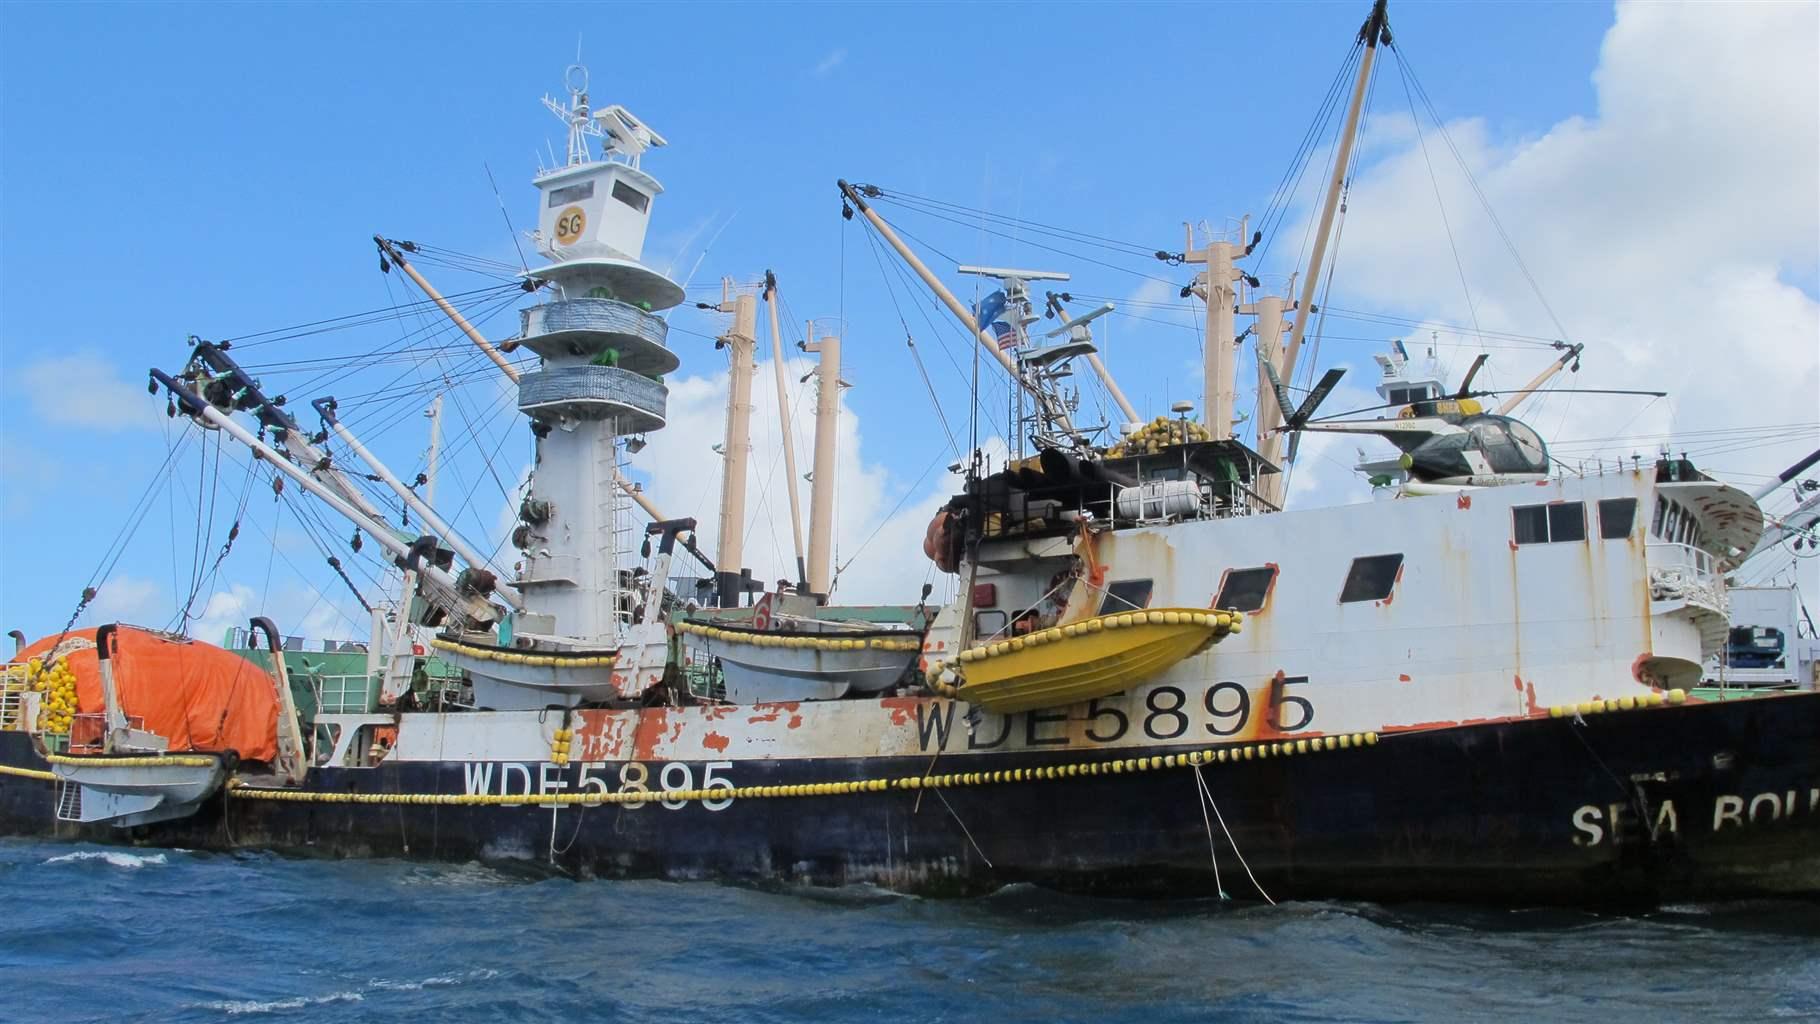 Open letter goes to Jimmy Pattison to solve his fleet's fishery problems |  Raincoast